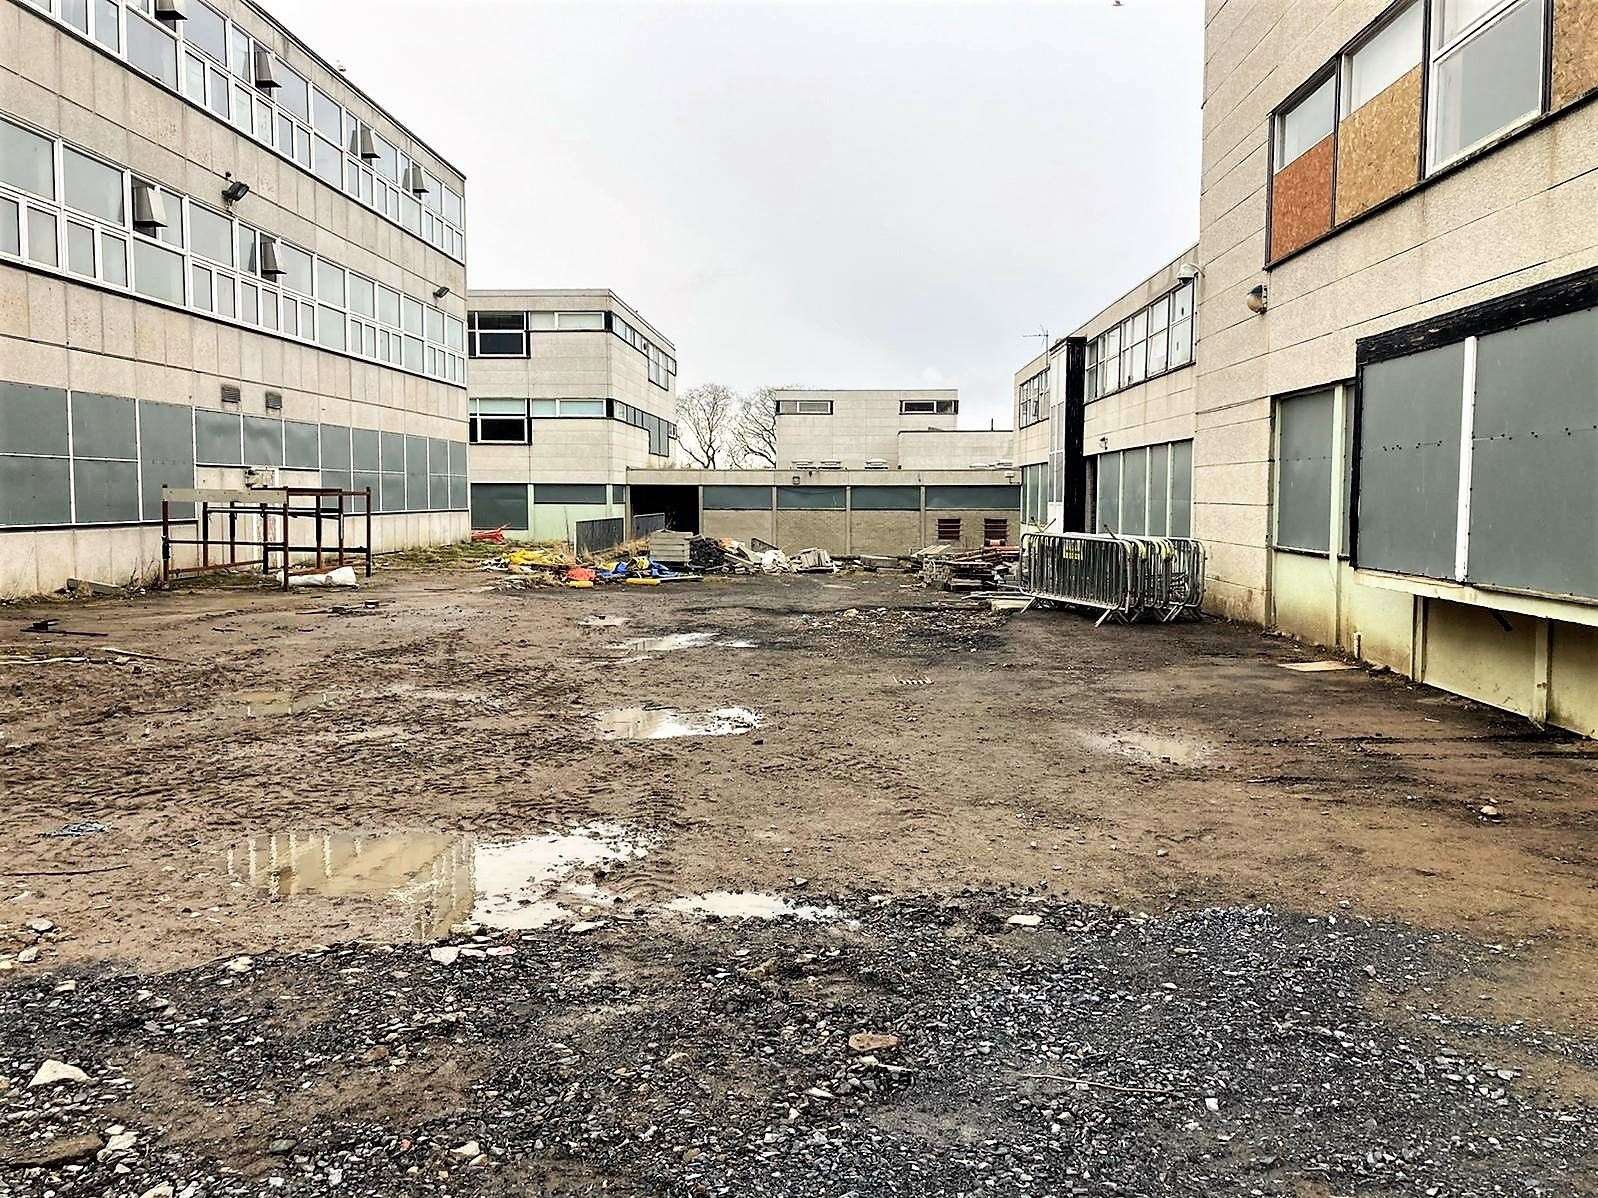 The path leading to Wick High School skirts by the old school which is in a dilapidated condition. Picture: Iain Baikie